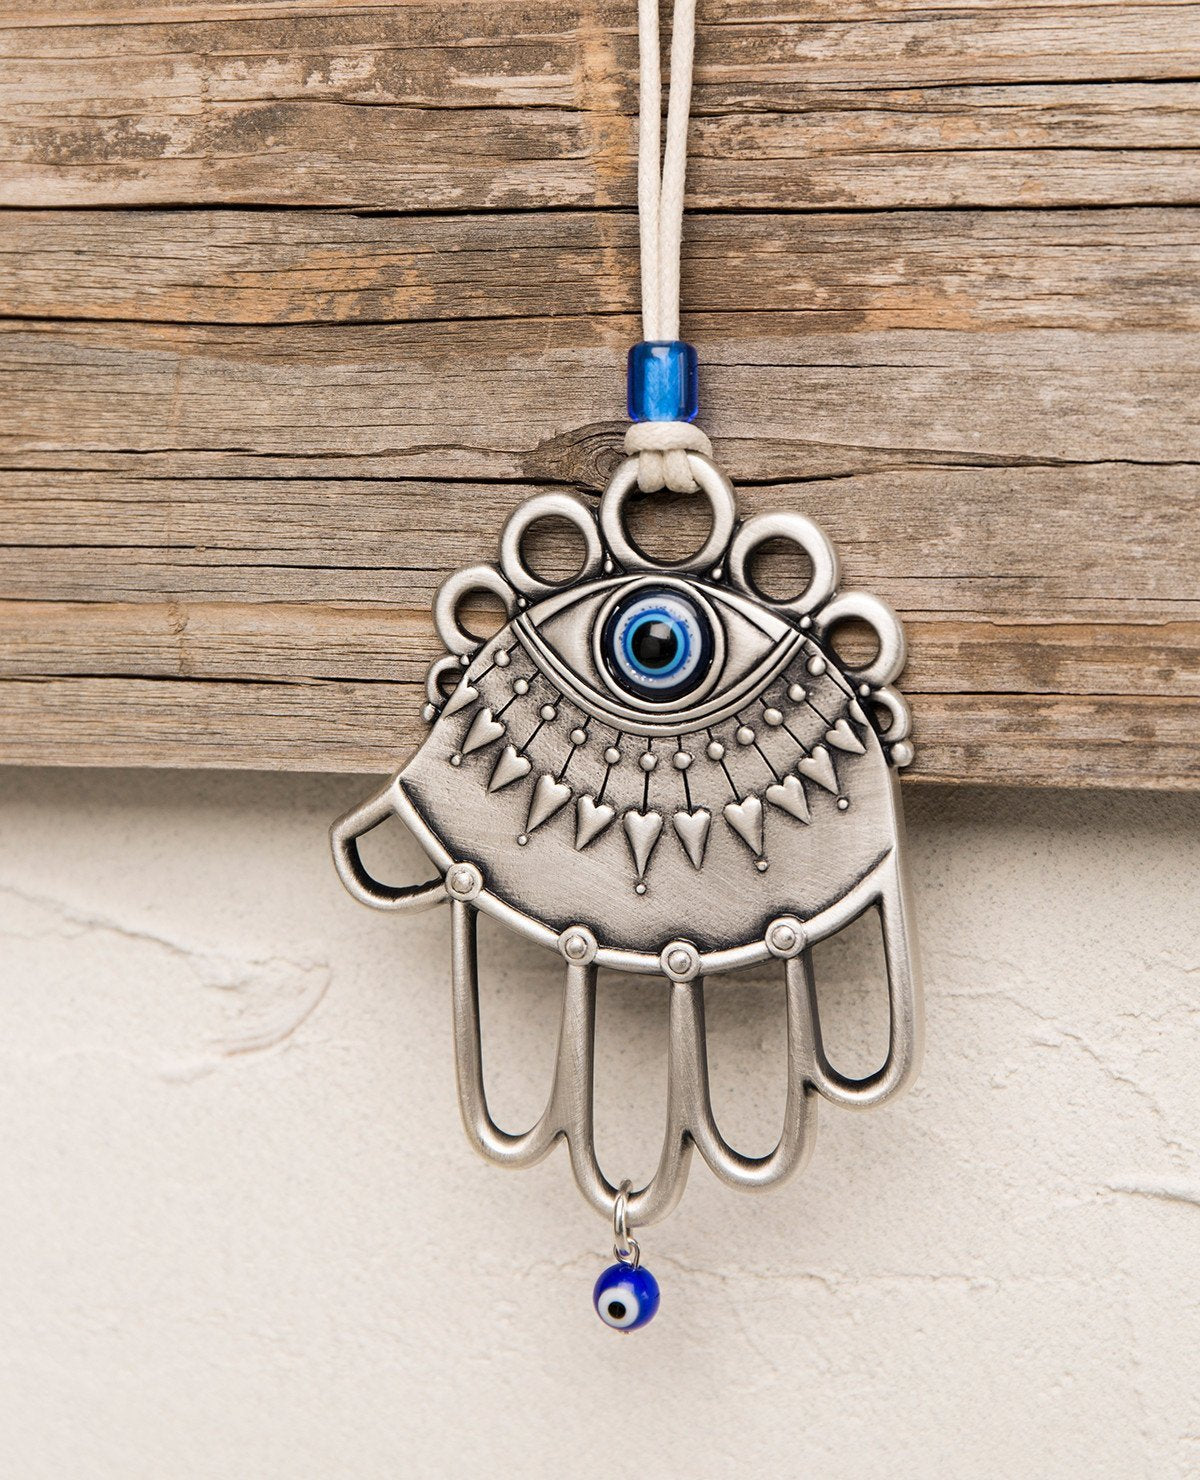 A one of a kind hanging Hamsa ornament. It is designed with a combination of different styles, some of which are hollow, while others are solid decorated surfaces. Embedded at the top of the Hamsa is a large blue eye, decorated by a lower eyelash in the shape of heart arrows. The fingers of the Hamsa are hollow and at their bottom hangs a small blue eye. The ornament is coated in sterling silver and comes with a faux leather string for hanging, decorated by a blue bead. 
The blue eye is considered a charm a